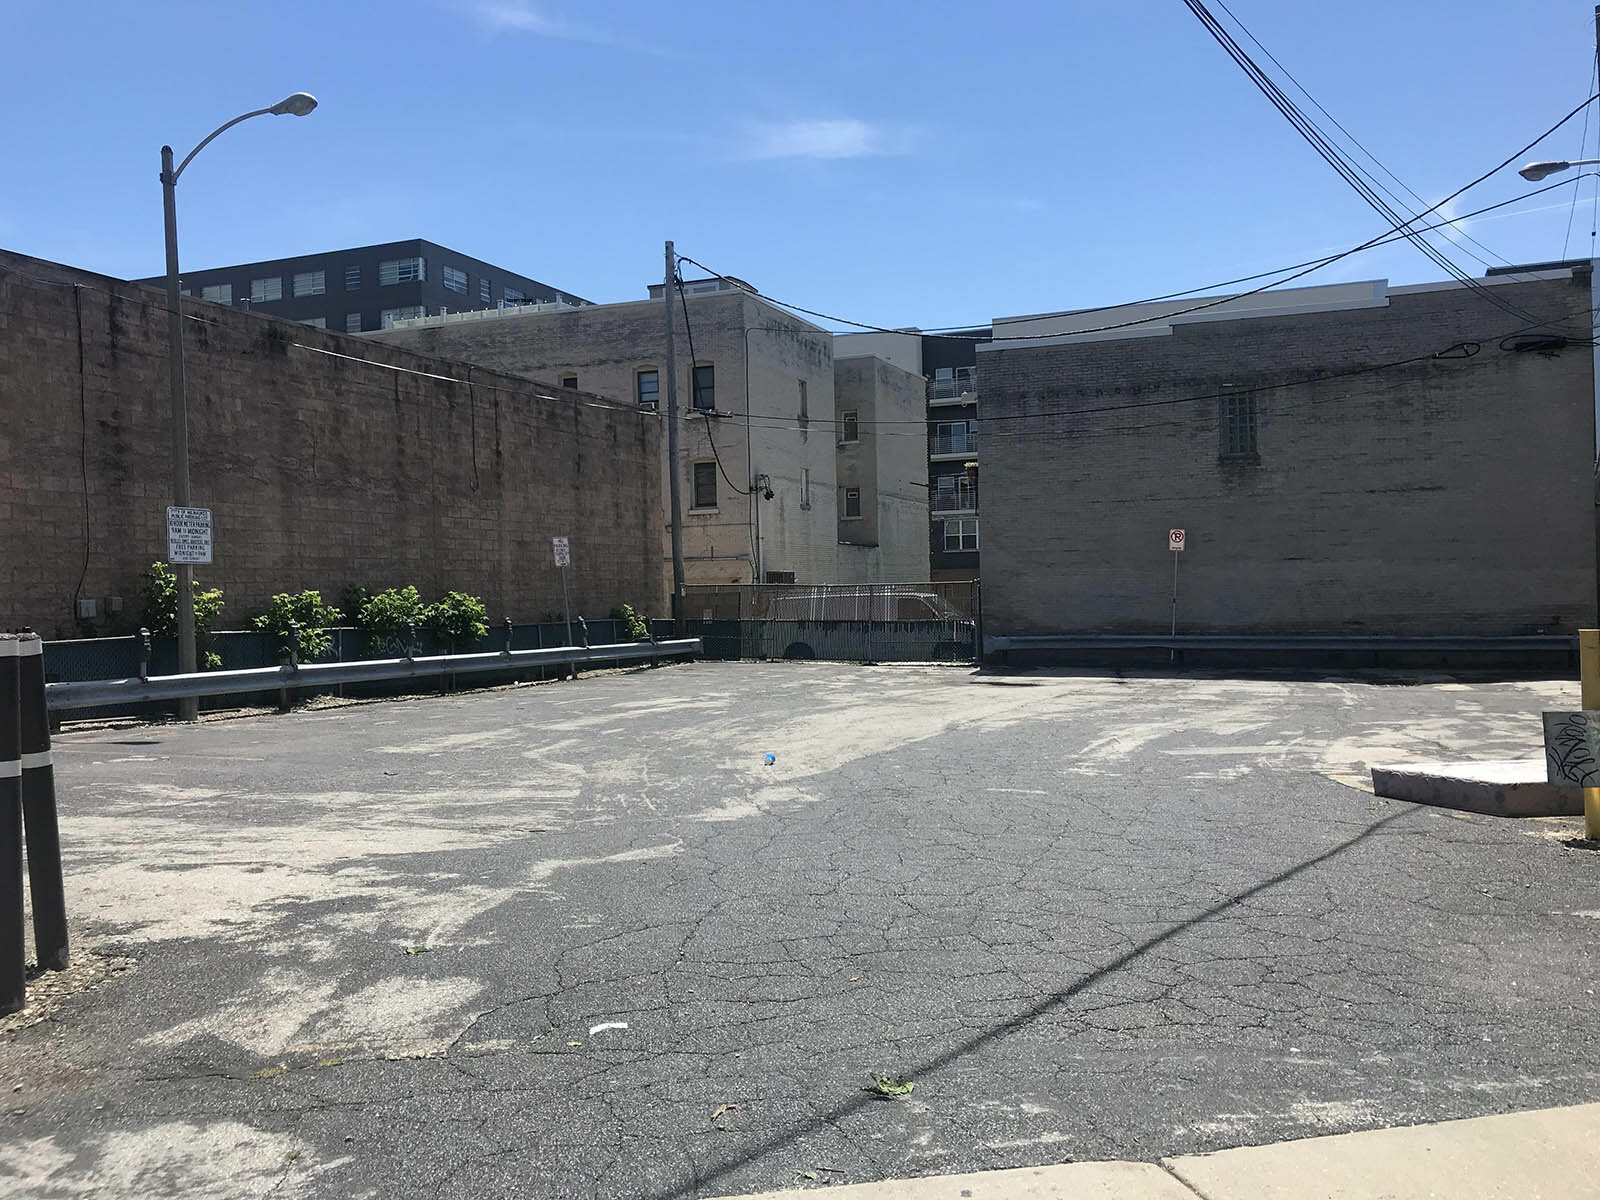 East Side Art Lot will offer local artists' work and outdoor public dining space